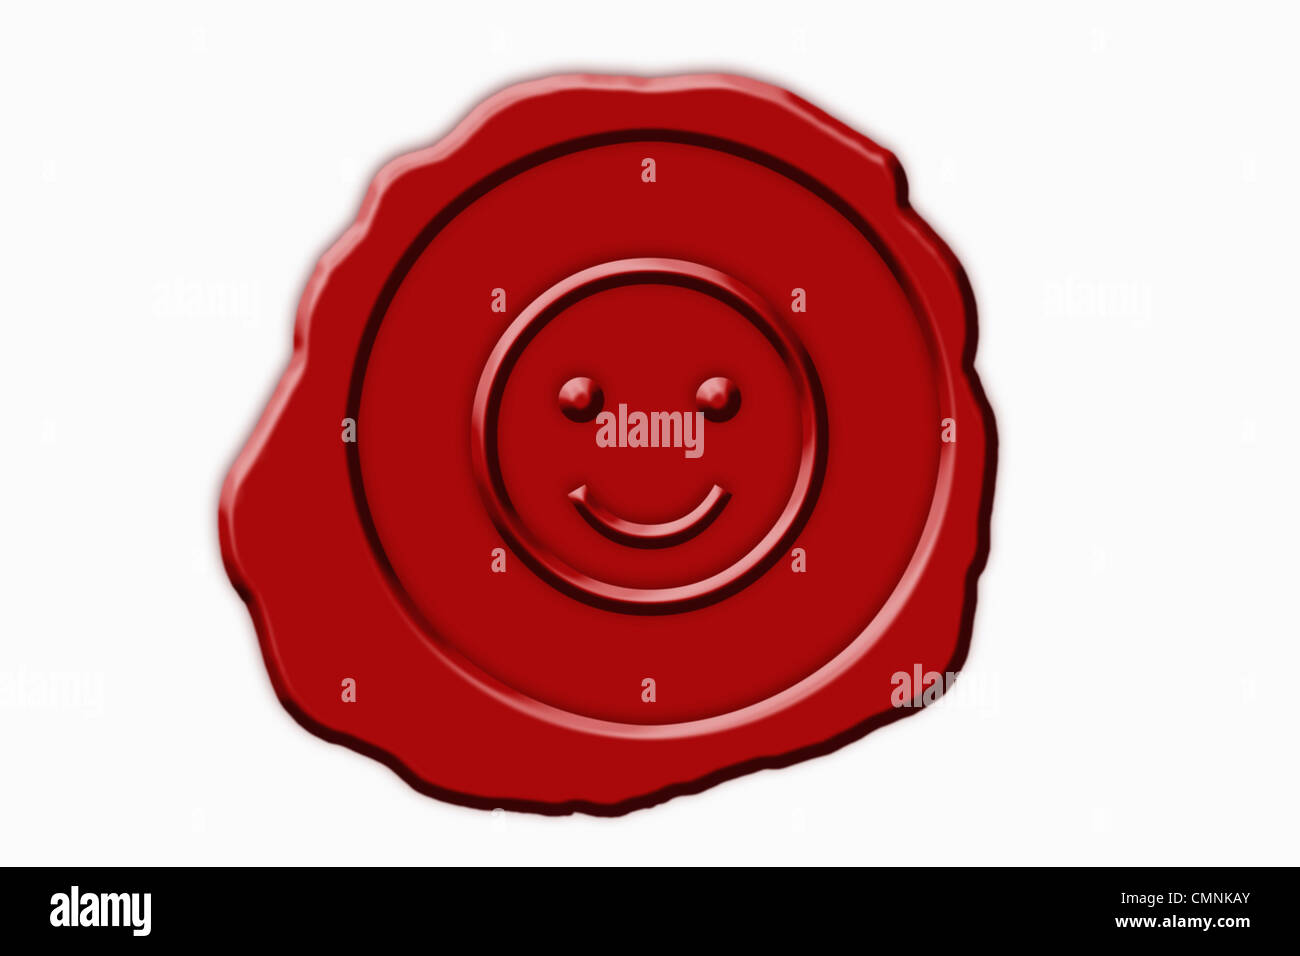 Detail photo of a red seal with a Smiley Symbol in the middle, background white. Stock Photo